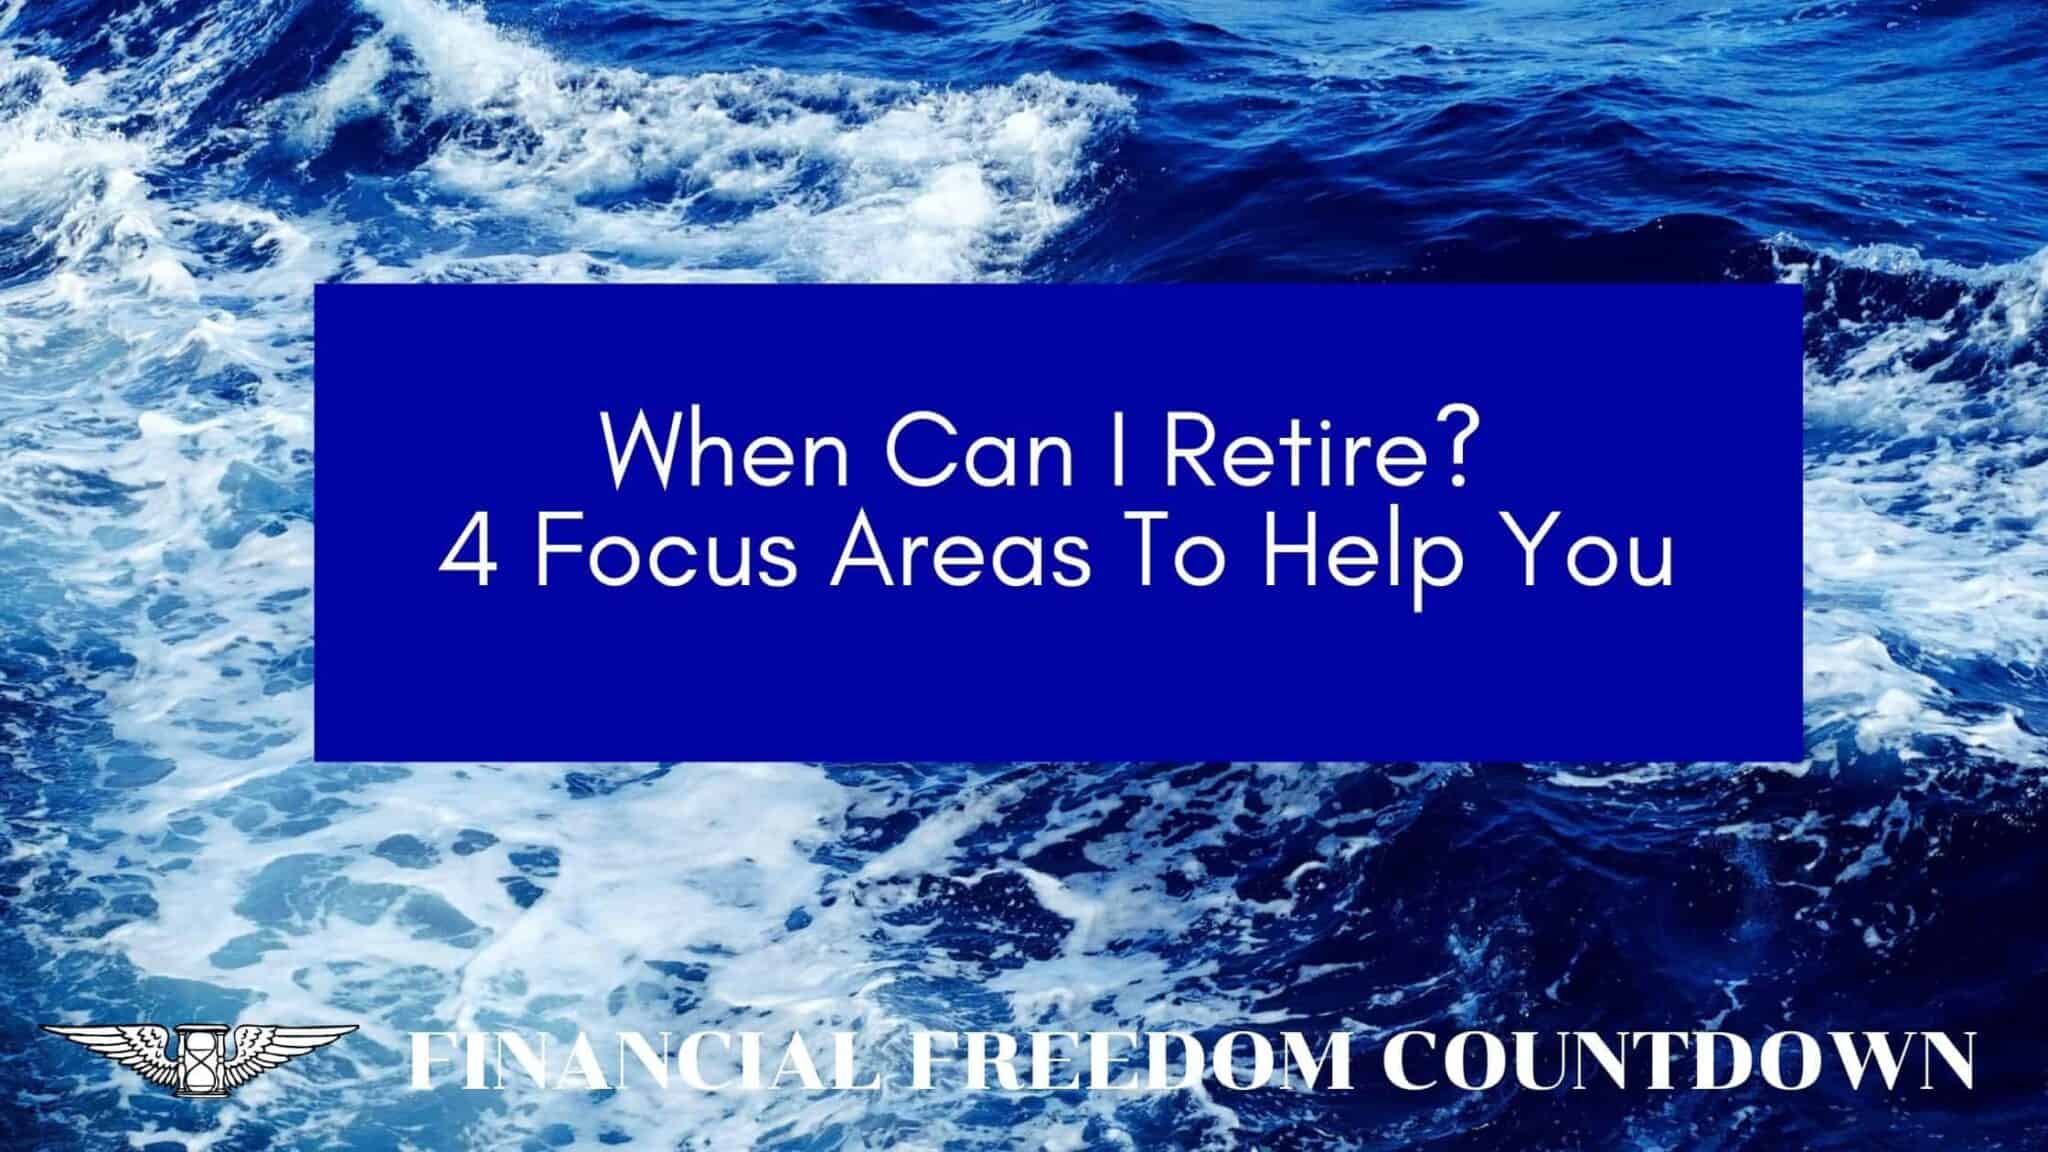 when-can-i-retire-4-focus-areas-to-help-you-financial-freedom-countdown